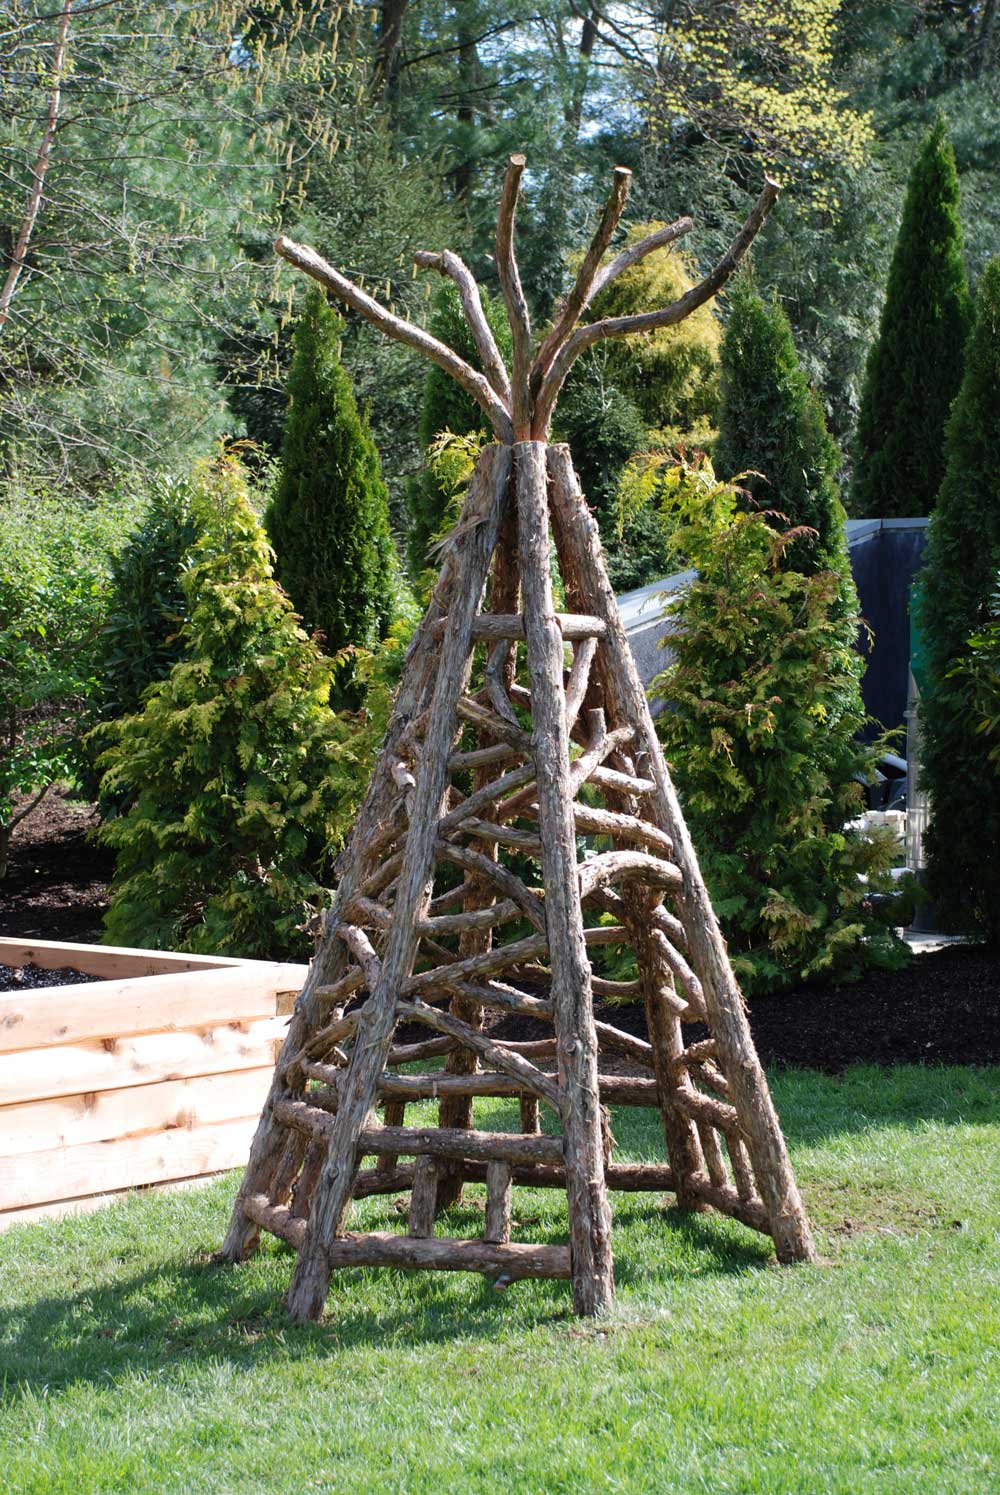 Outdoor rustic garden tepee built using bark-on trees and branches titled the Kend Tepee